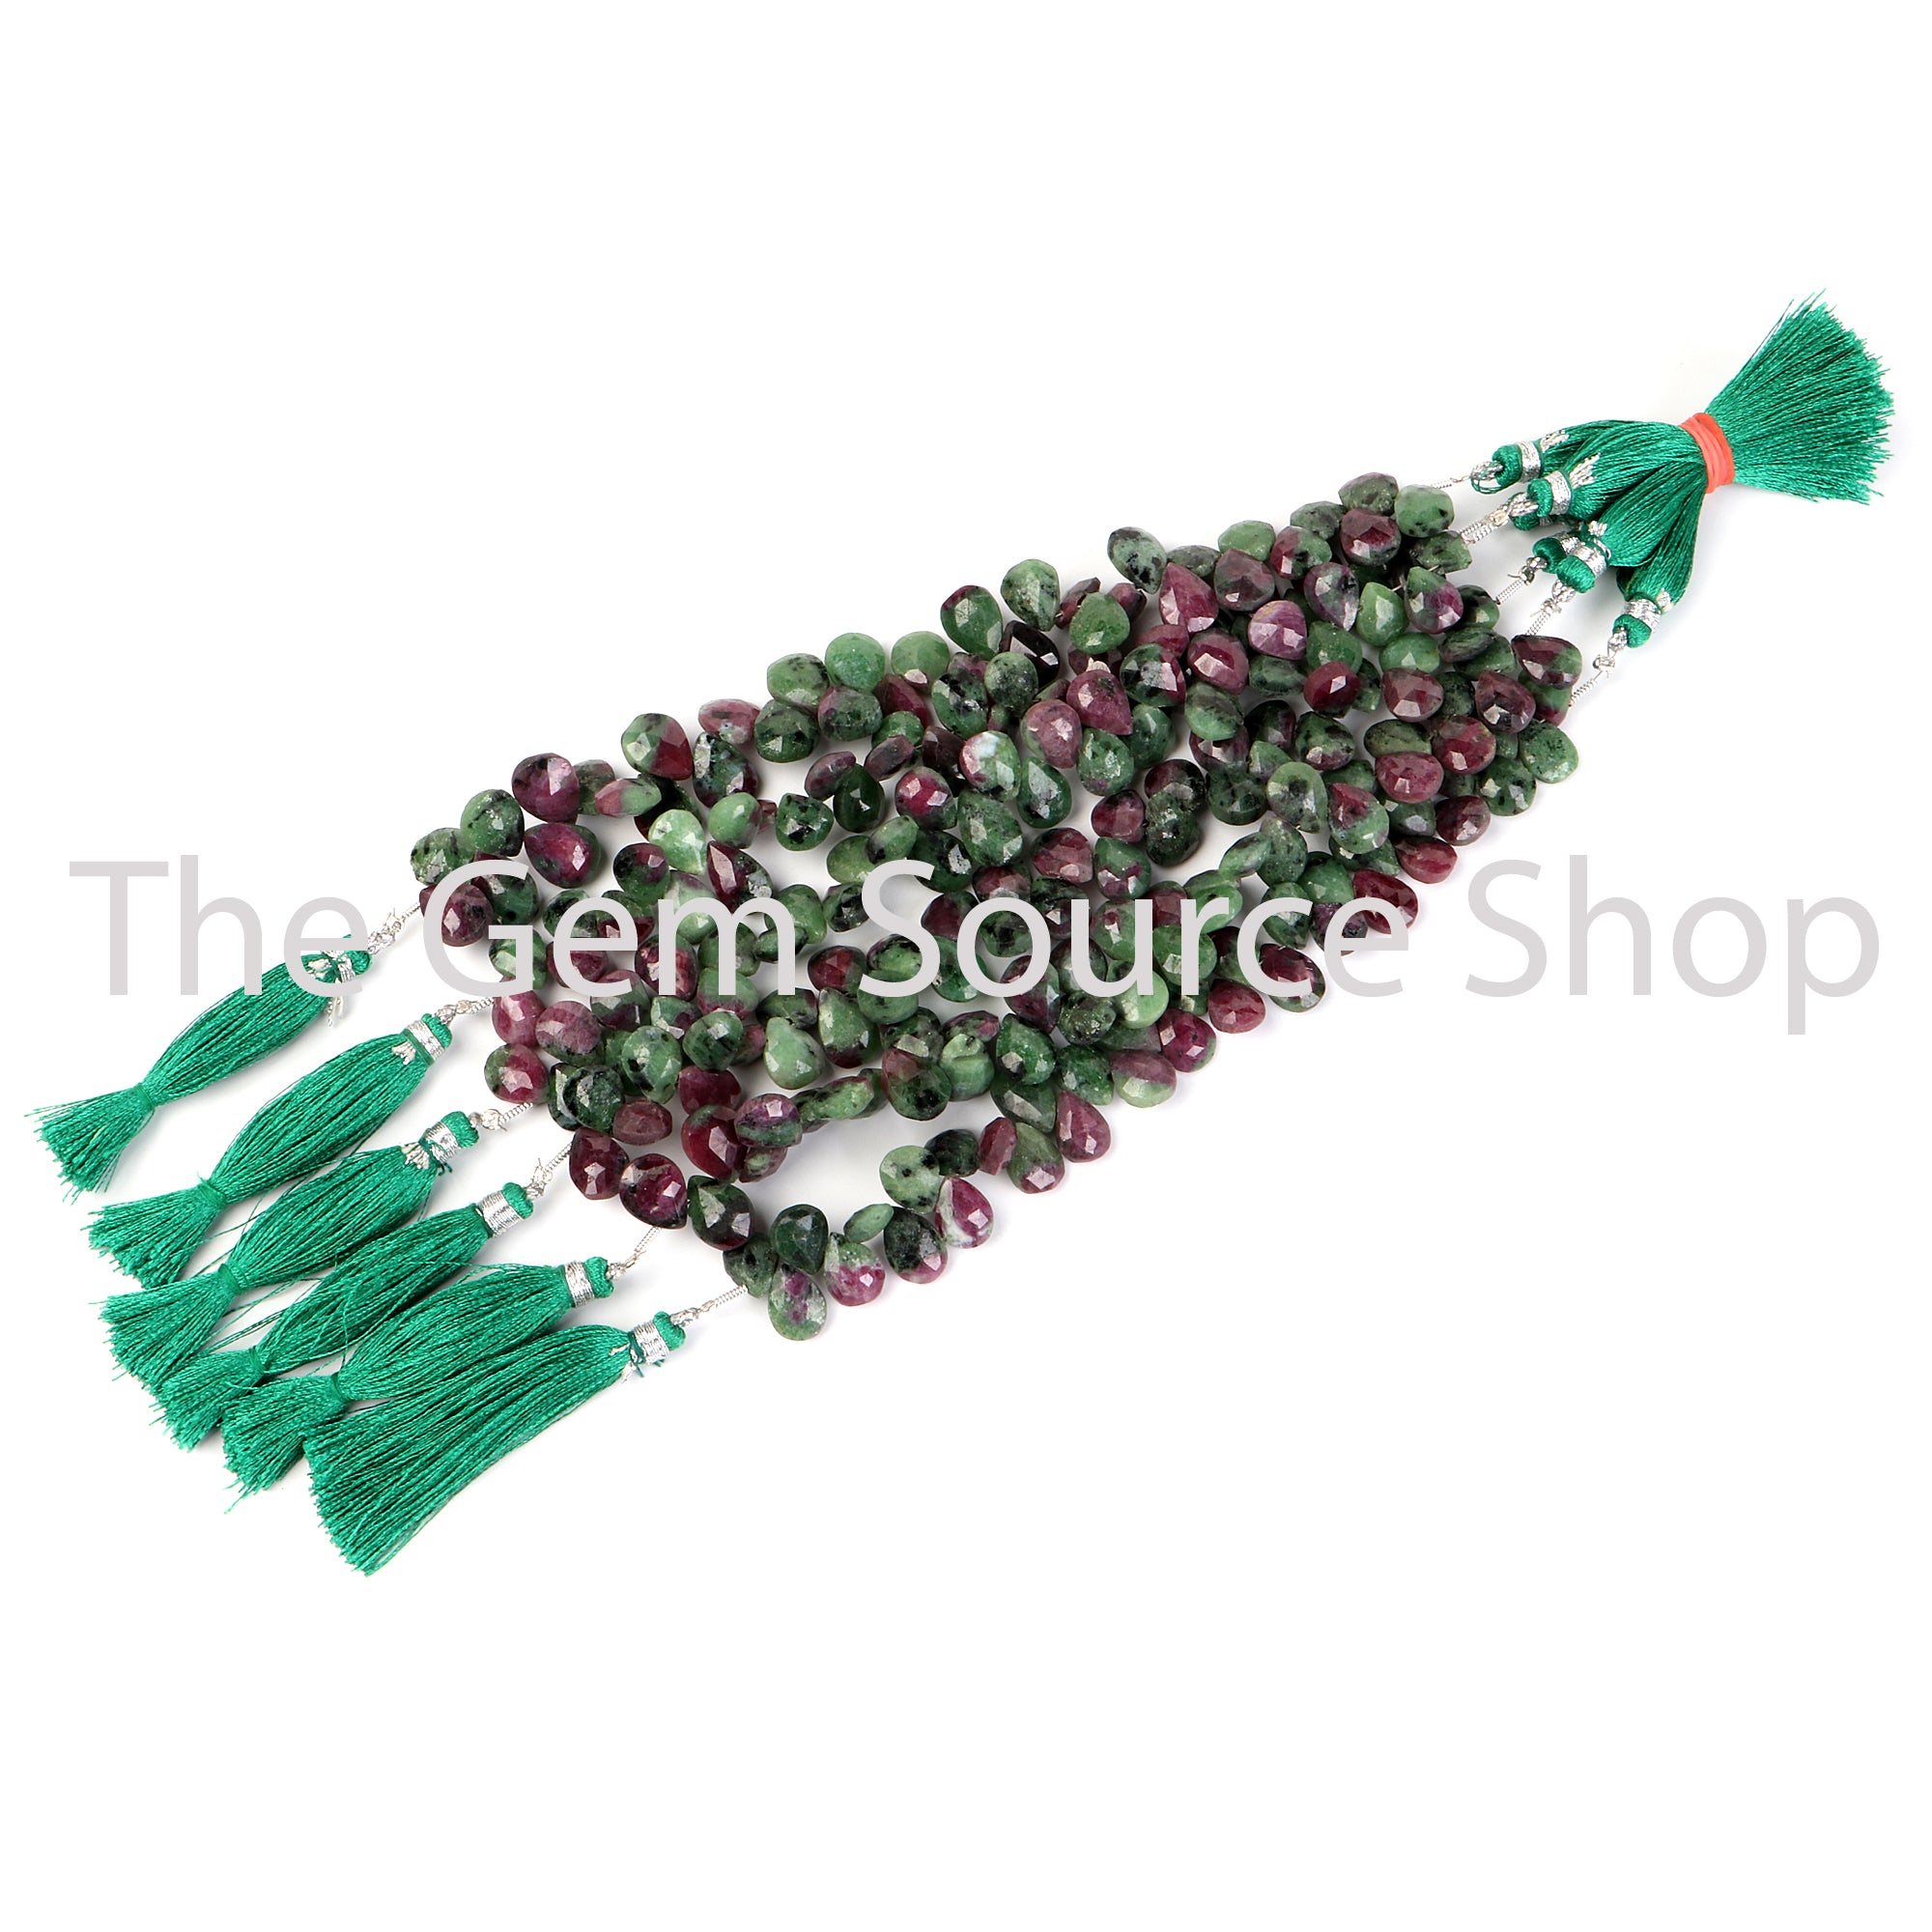 Natural Ruby Zoisite Beads, Ruby Zoisite Pear shape Beads, Ruby Zoisite Faceted Beads, Ruby Zoisite Gemstone Beads